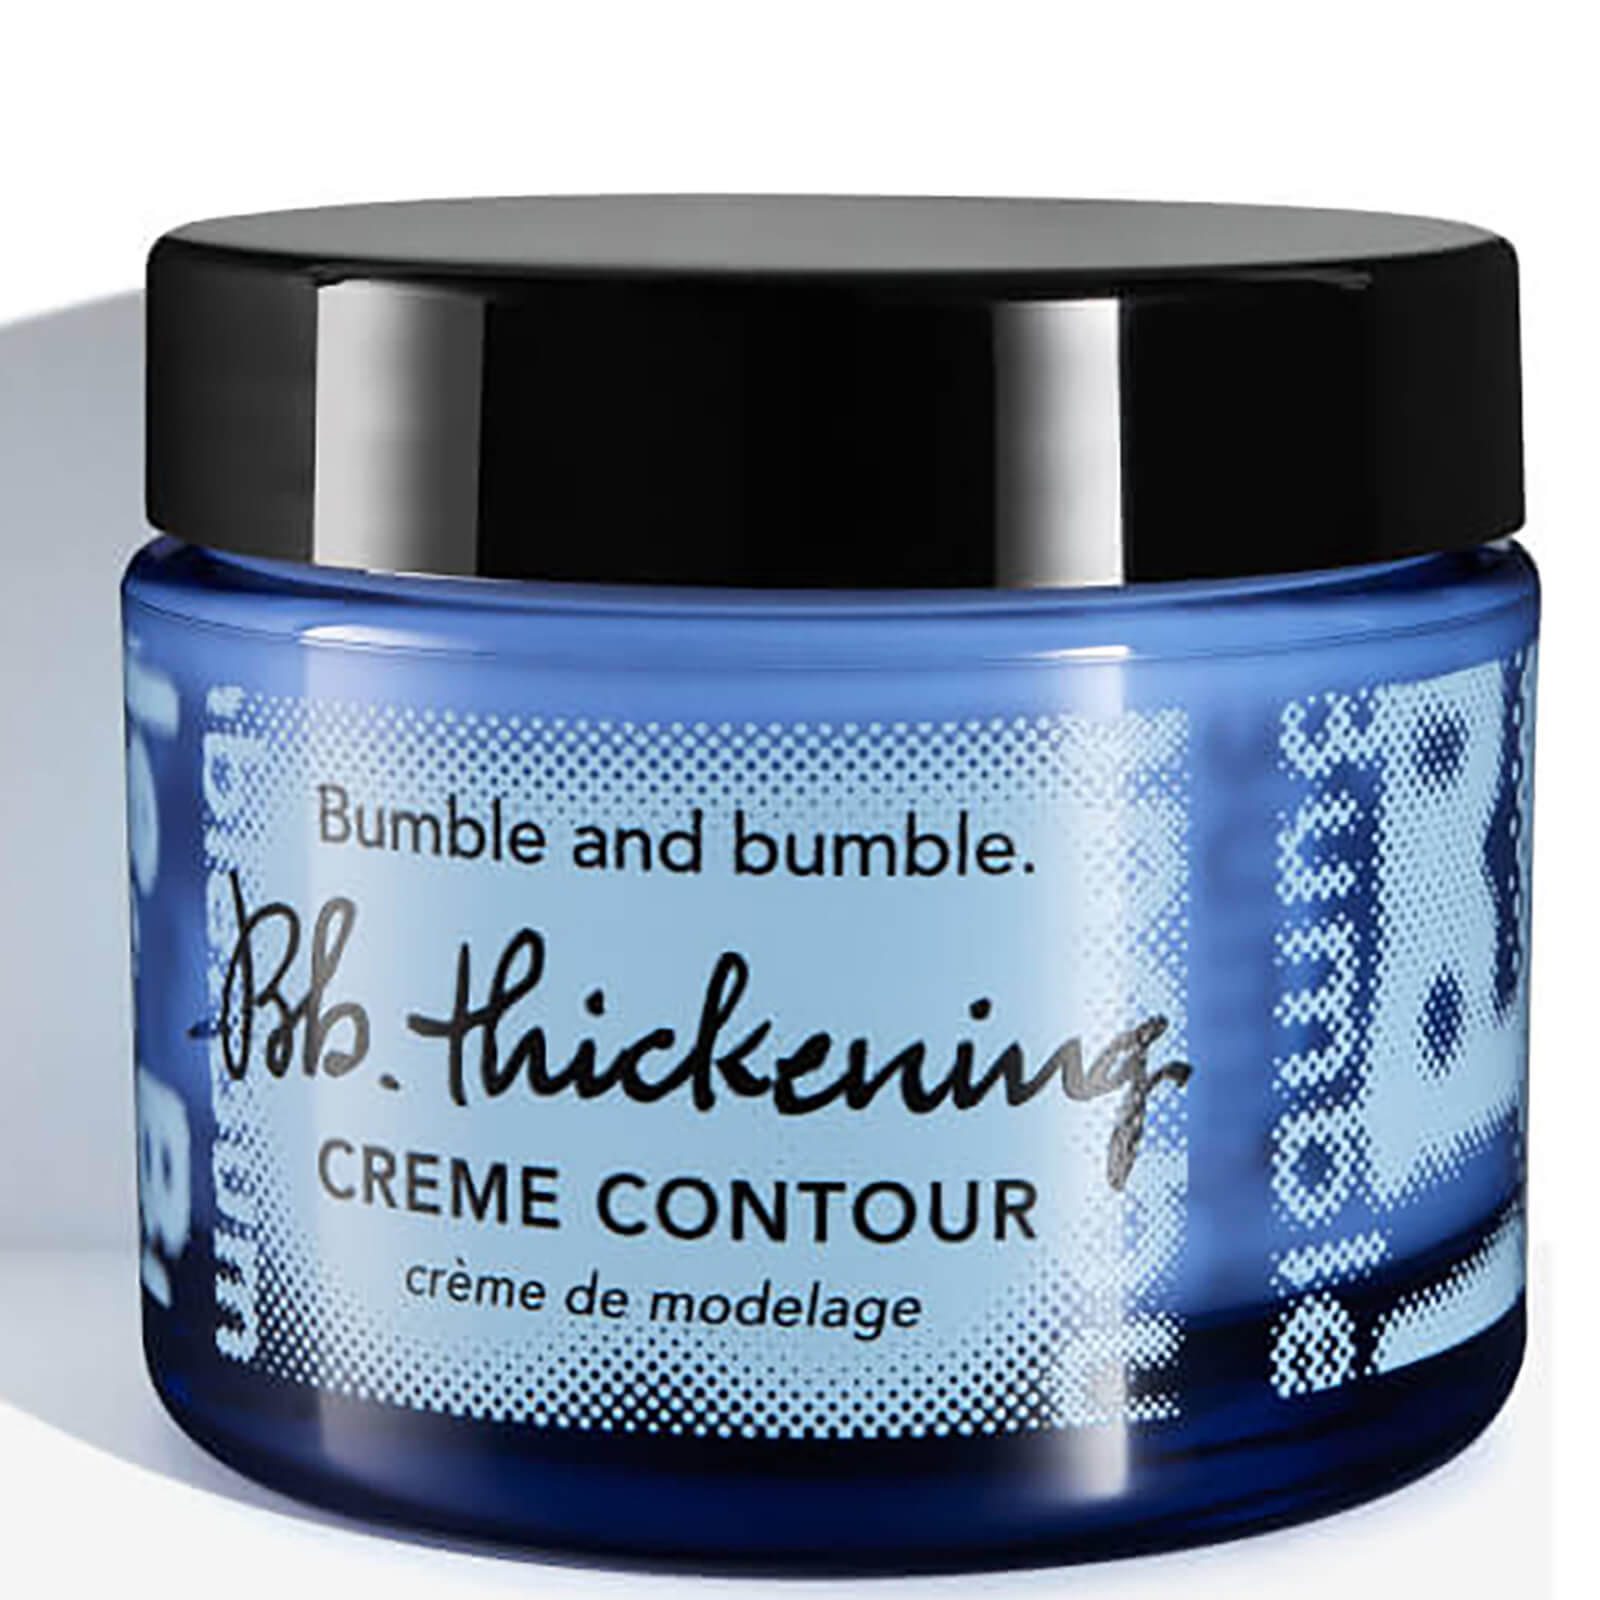 Bumble and bumble Thickening Crème Contour 47ml lookfantastic.com imagine